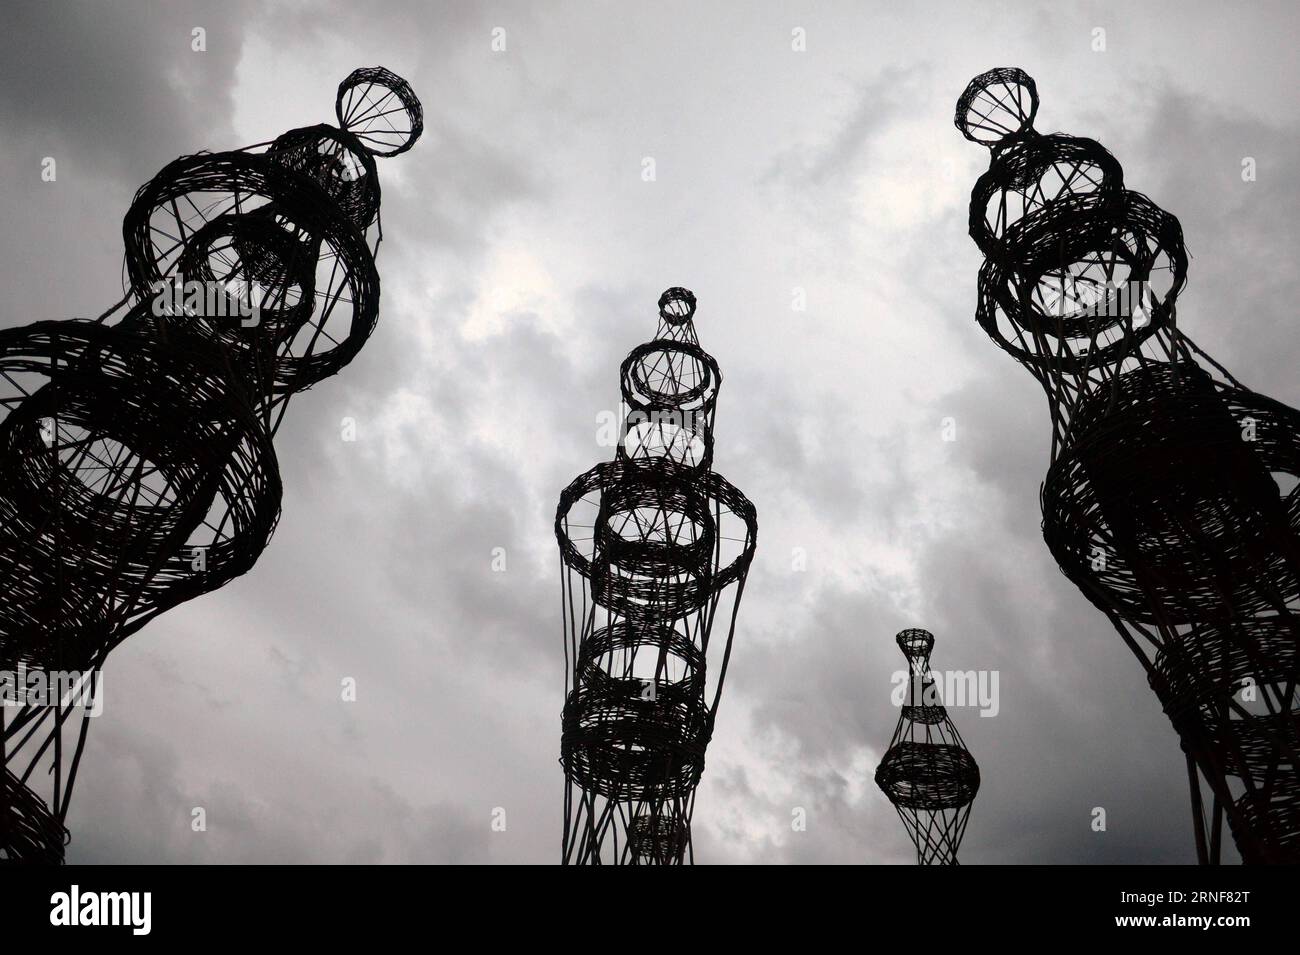 NIKOLA-LENIVETS, July 23, 2016 -- Art work The Cage is displayed during a landscape architecture festival called Archstoyanie in Nikola-Lenivets, Russia, July 23, 2016. The annual event held in Nikola-Lenivets outside Moscow presents brand-new ideas that could redefine visitors view of architecture. )(zcc) RUSSIA-NIKOLA-LENIVETS-ARCHSTOYANIE FESTIVAL PavelxBednyakov PUBLICATIONxNOTxINxCHN   Nikola Lenivets July 23 2016 Art Work The Cage IS displayed during a Landscape Architecture Festival called Archstoyanie in Nikola Lenivets Russia July 23 2016 The Annual Event Hero in Nikola Lenivets outsi Stock Photo